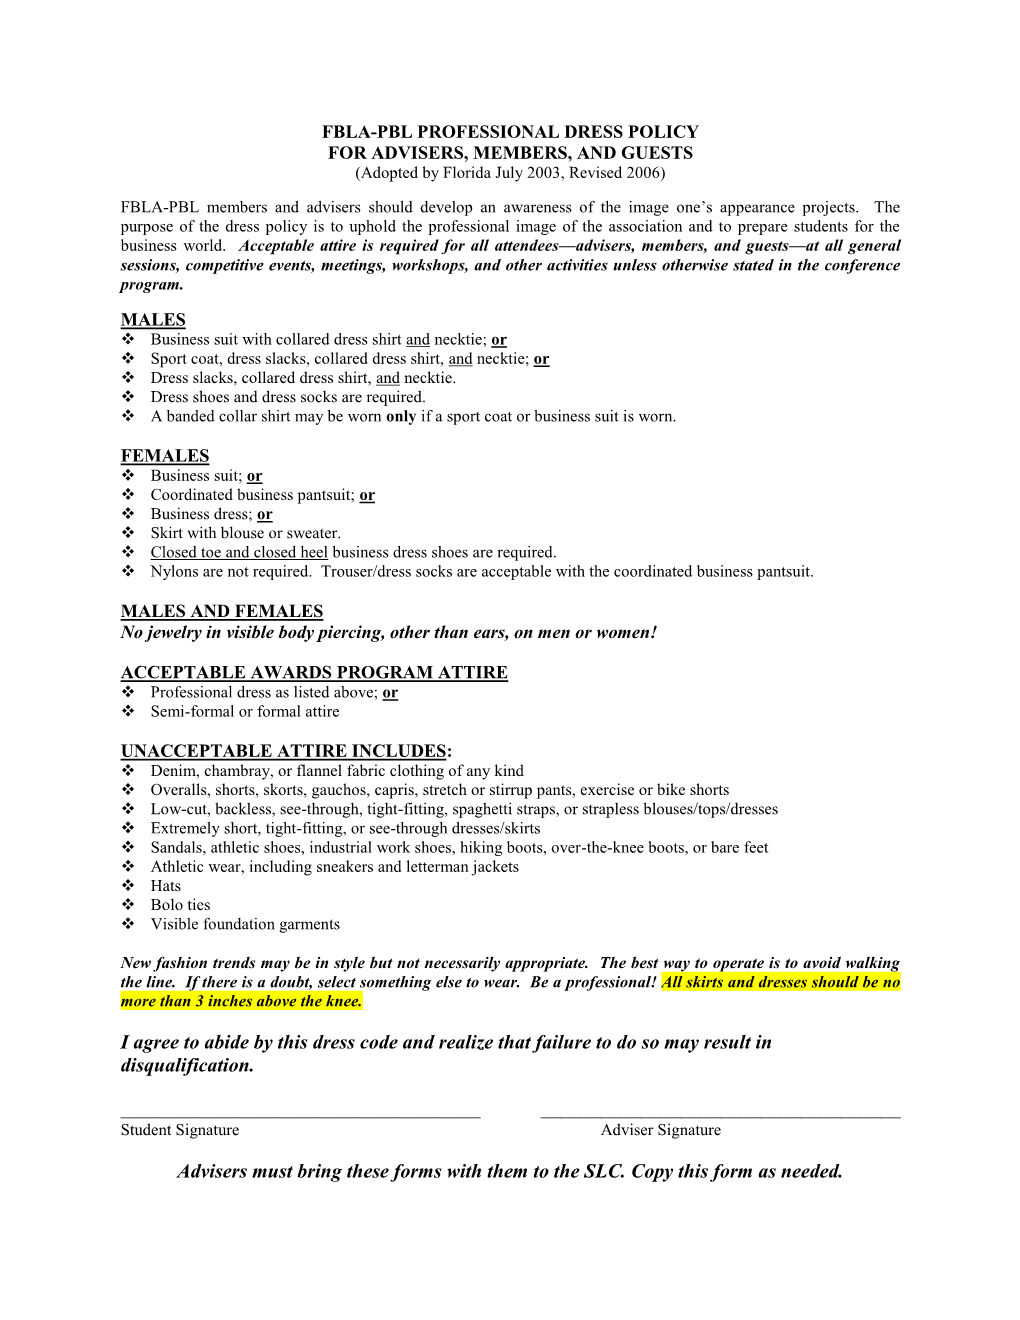 FBLA-PBL PROFESSIONAL DRESS POLICY for ADVISERS, MEMBERS, and GUESTS (Adopted by Florida July 2003, Revised 2006)